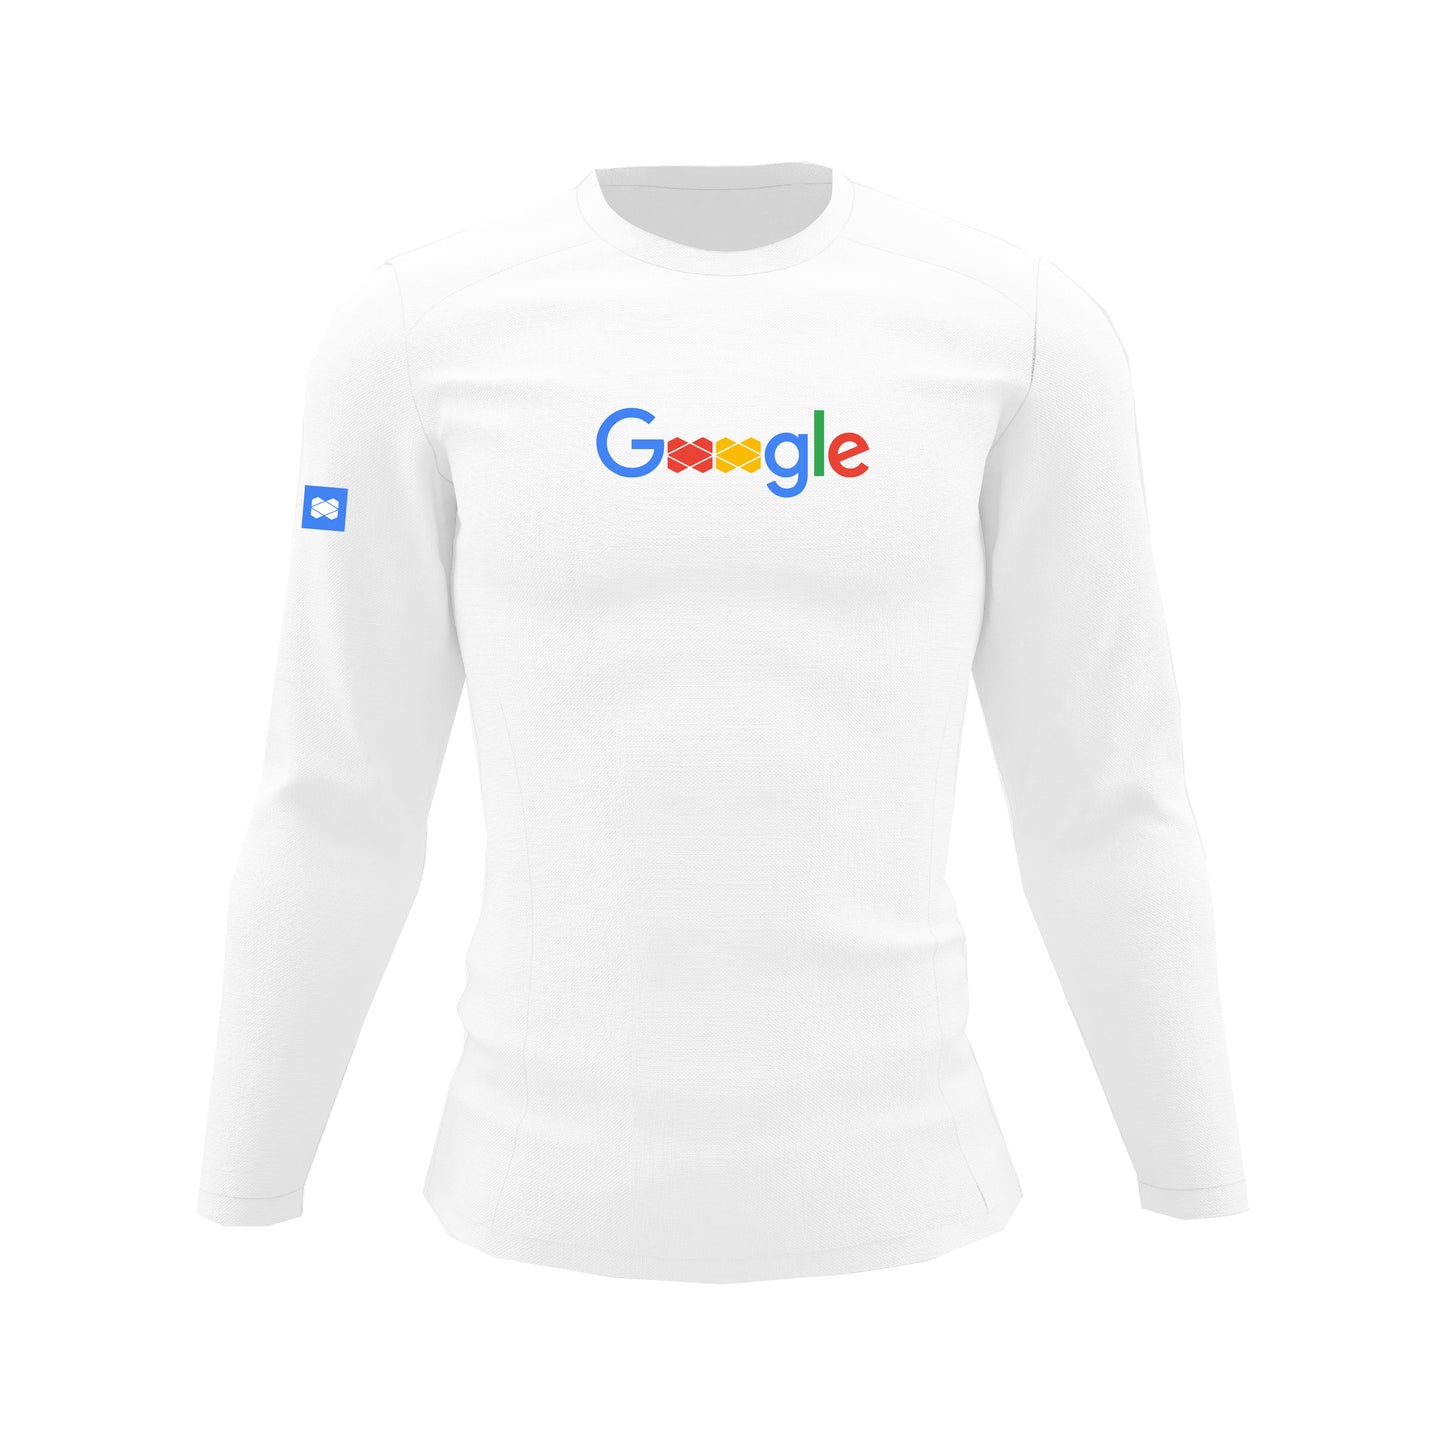 Google - Robot Force ® Sweatshirt by Athletic Forces -  Model 3